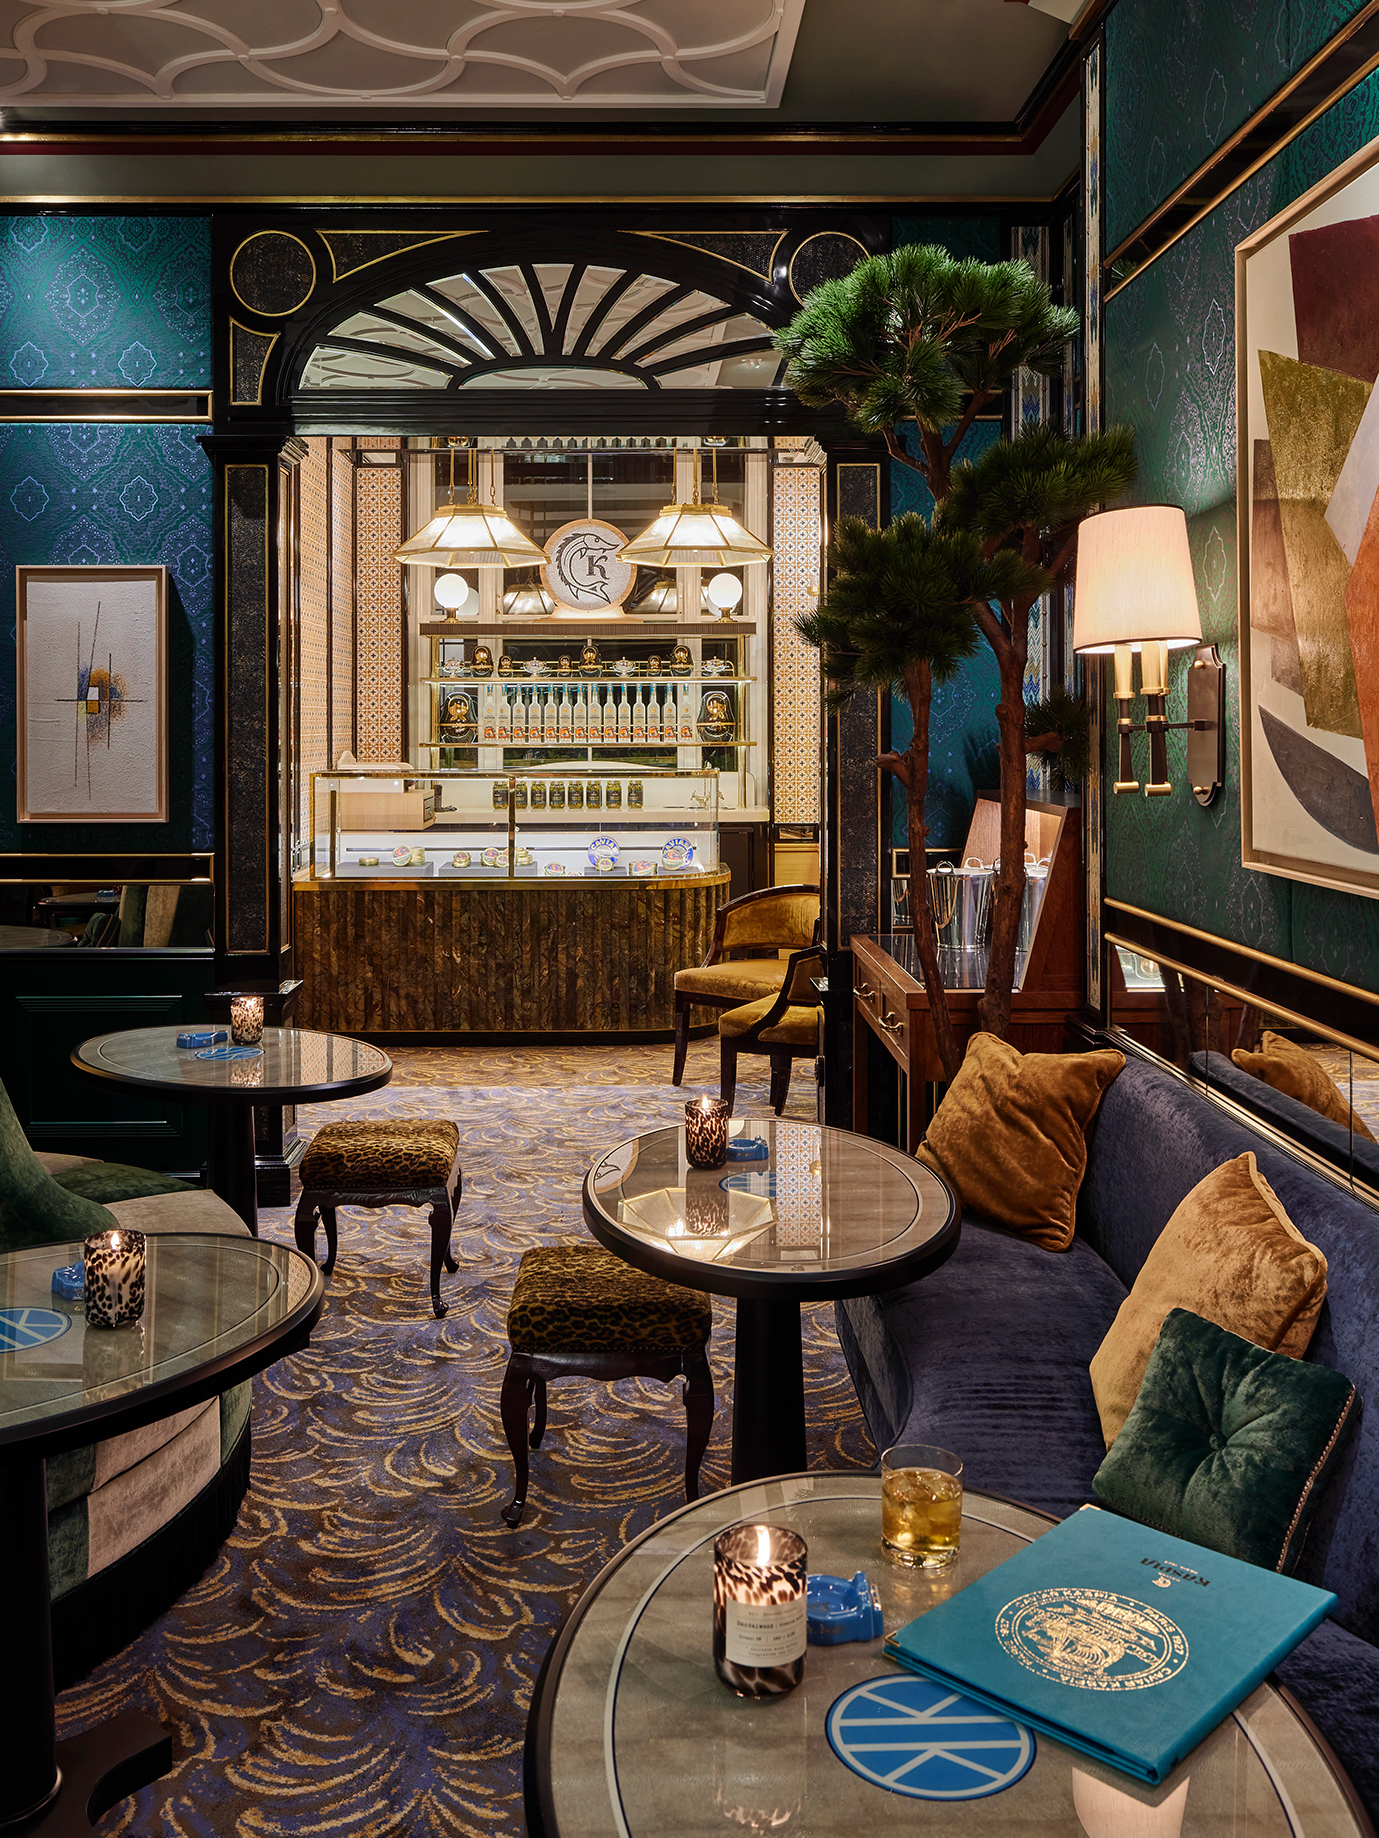 Portuguese studio Oitoemponto brought a maximalist aesthetic to the new London iteration of Paris institution Caviar Kaspia - Effect Magazine